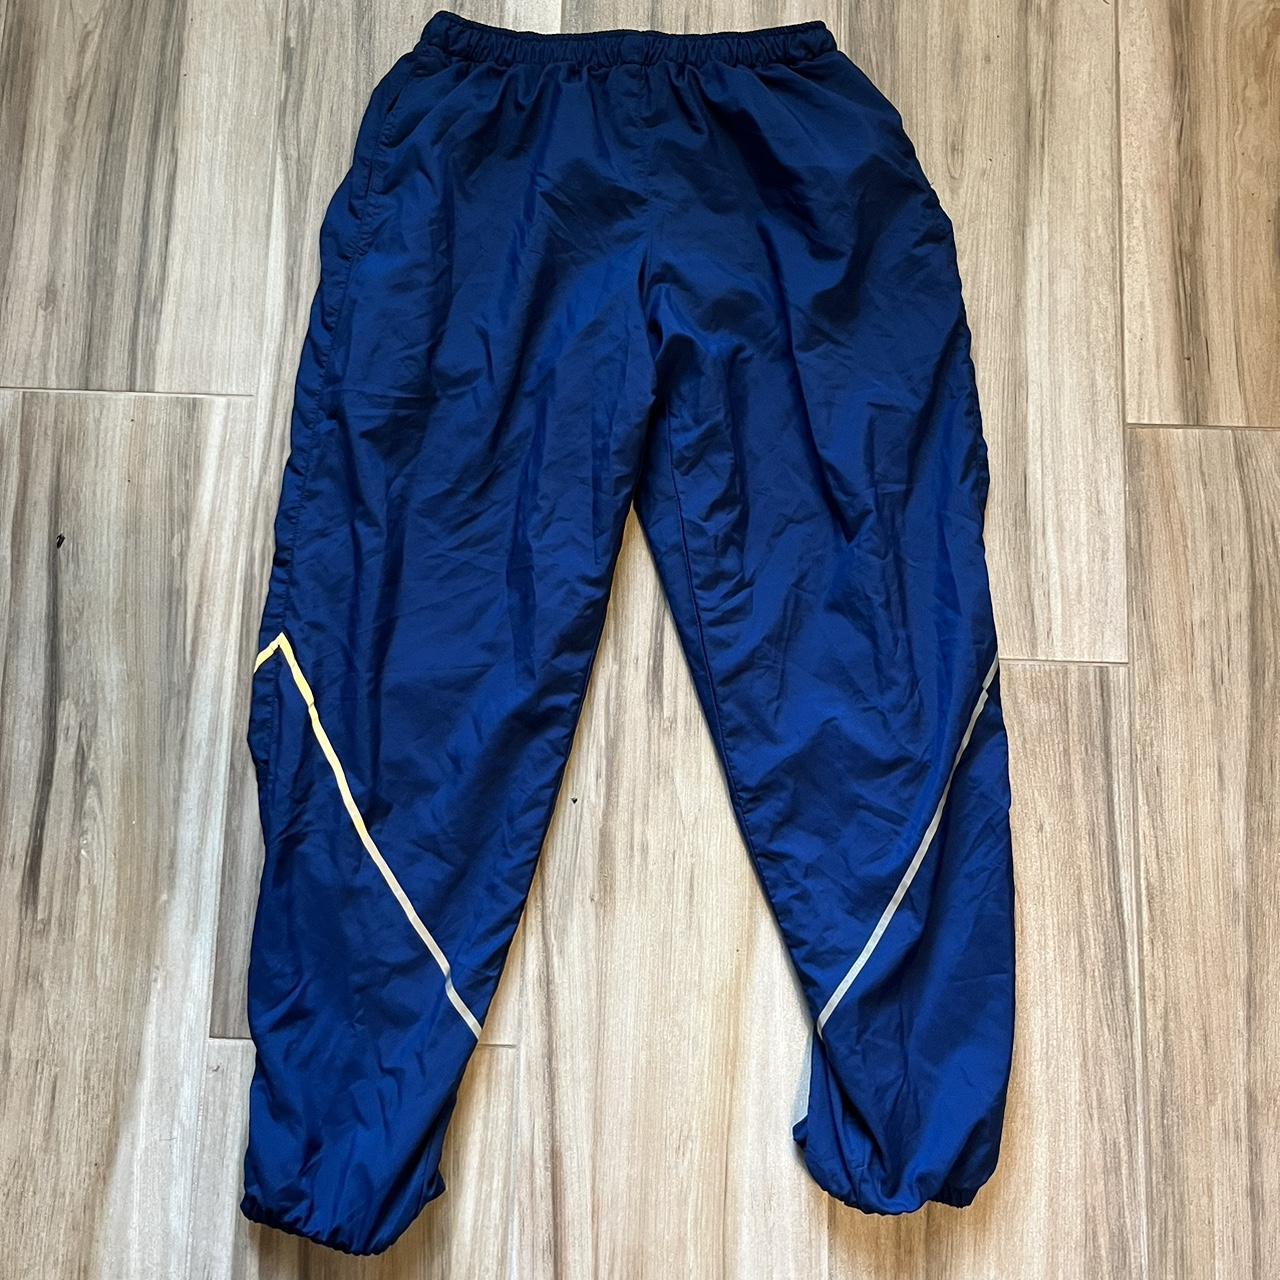 Blue and grey striped track pants with adjustable... - Depop